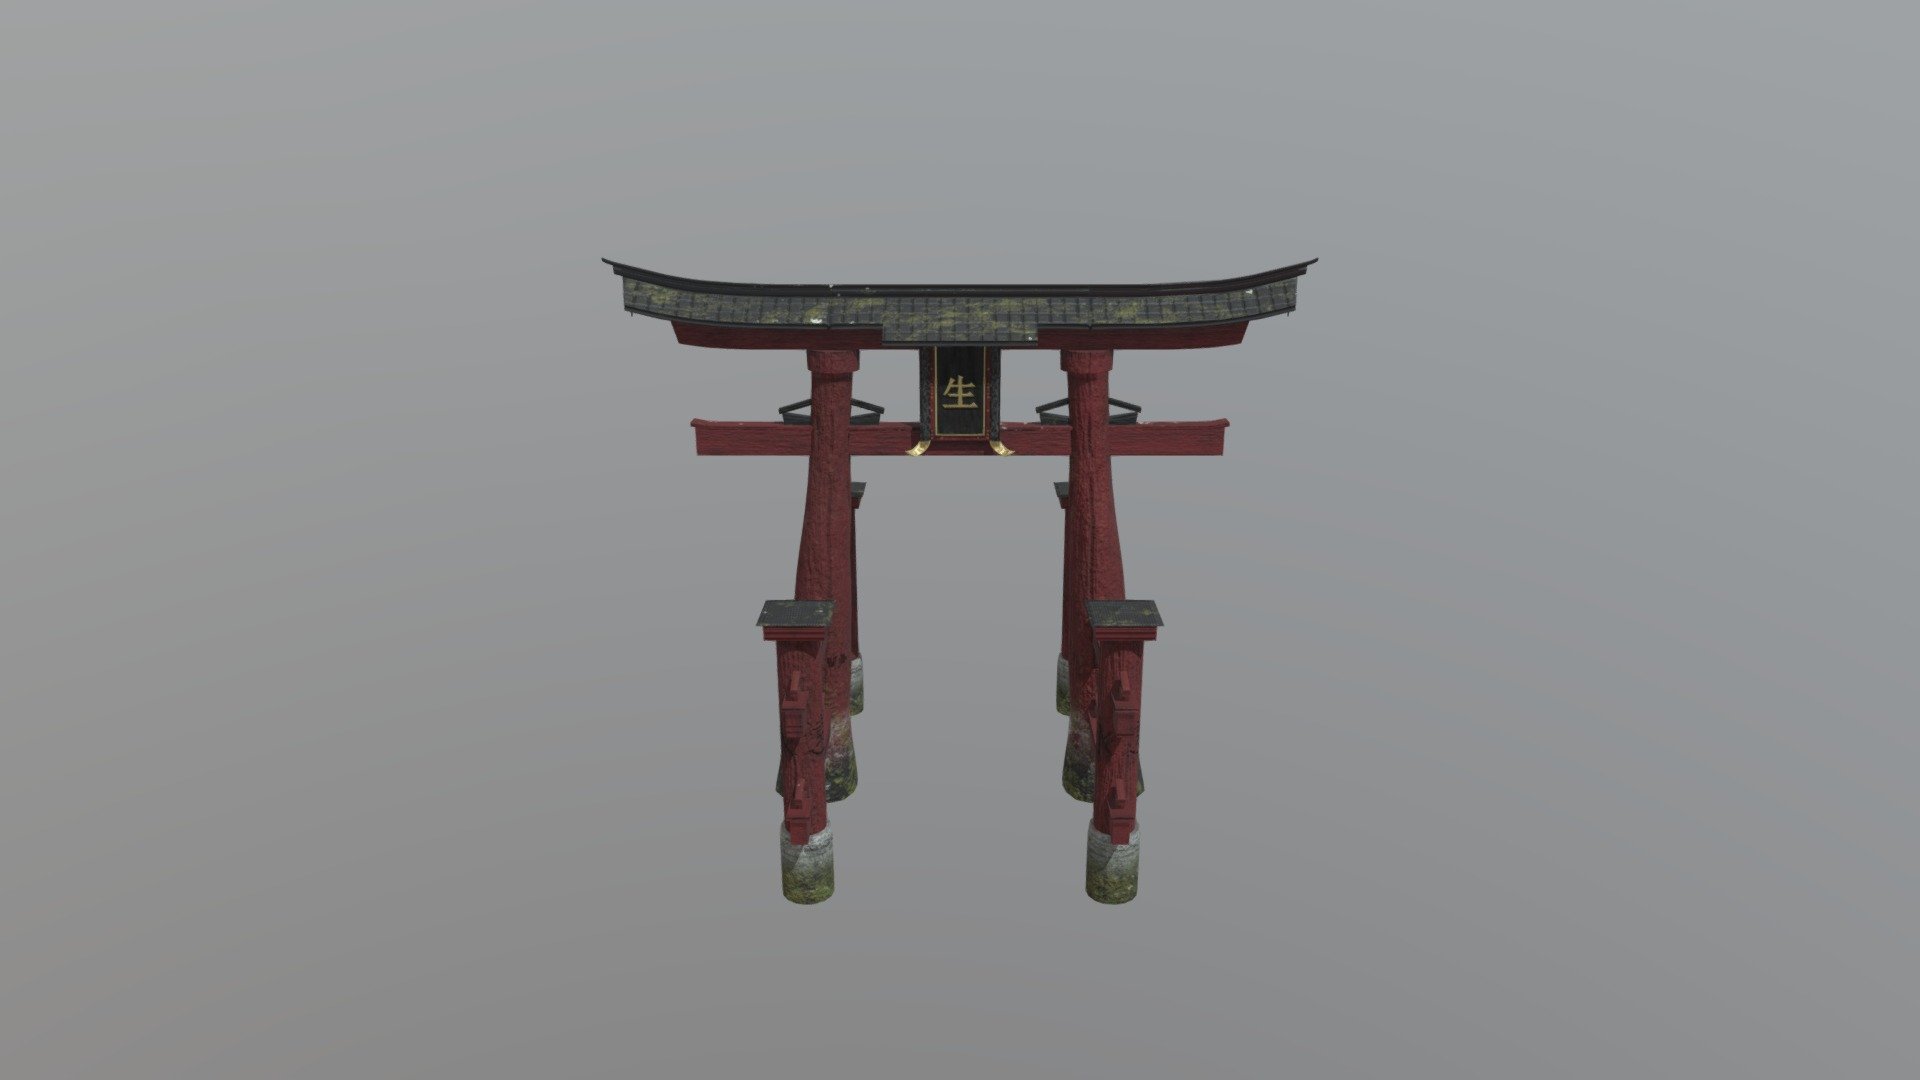 A 3D model of a japanese torii.

It was made with 3ds Max, Mudbox and Substance Painter. It includes 2 4K textures 3d model